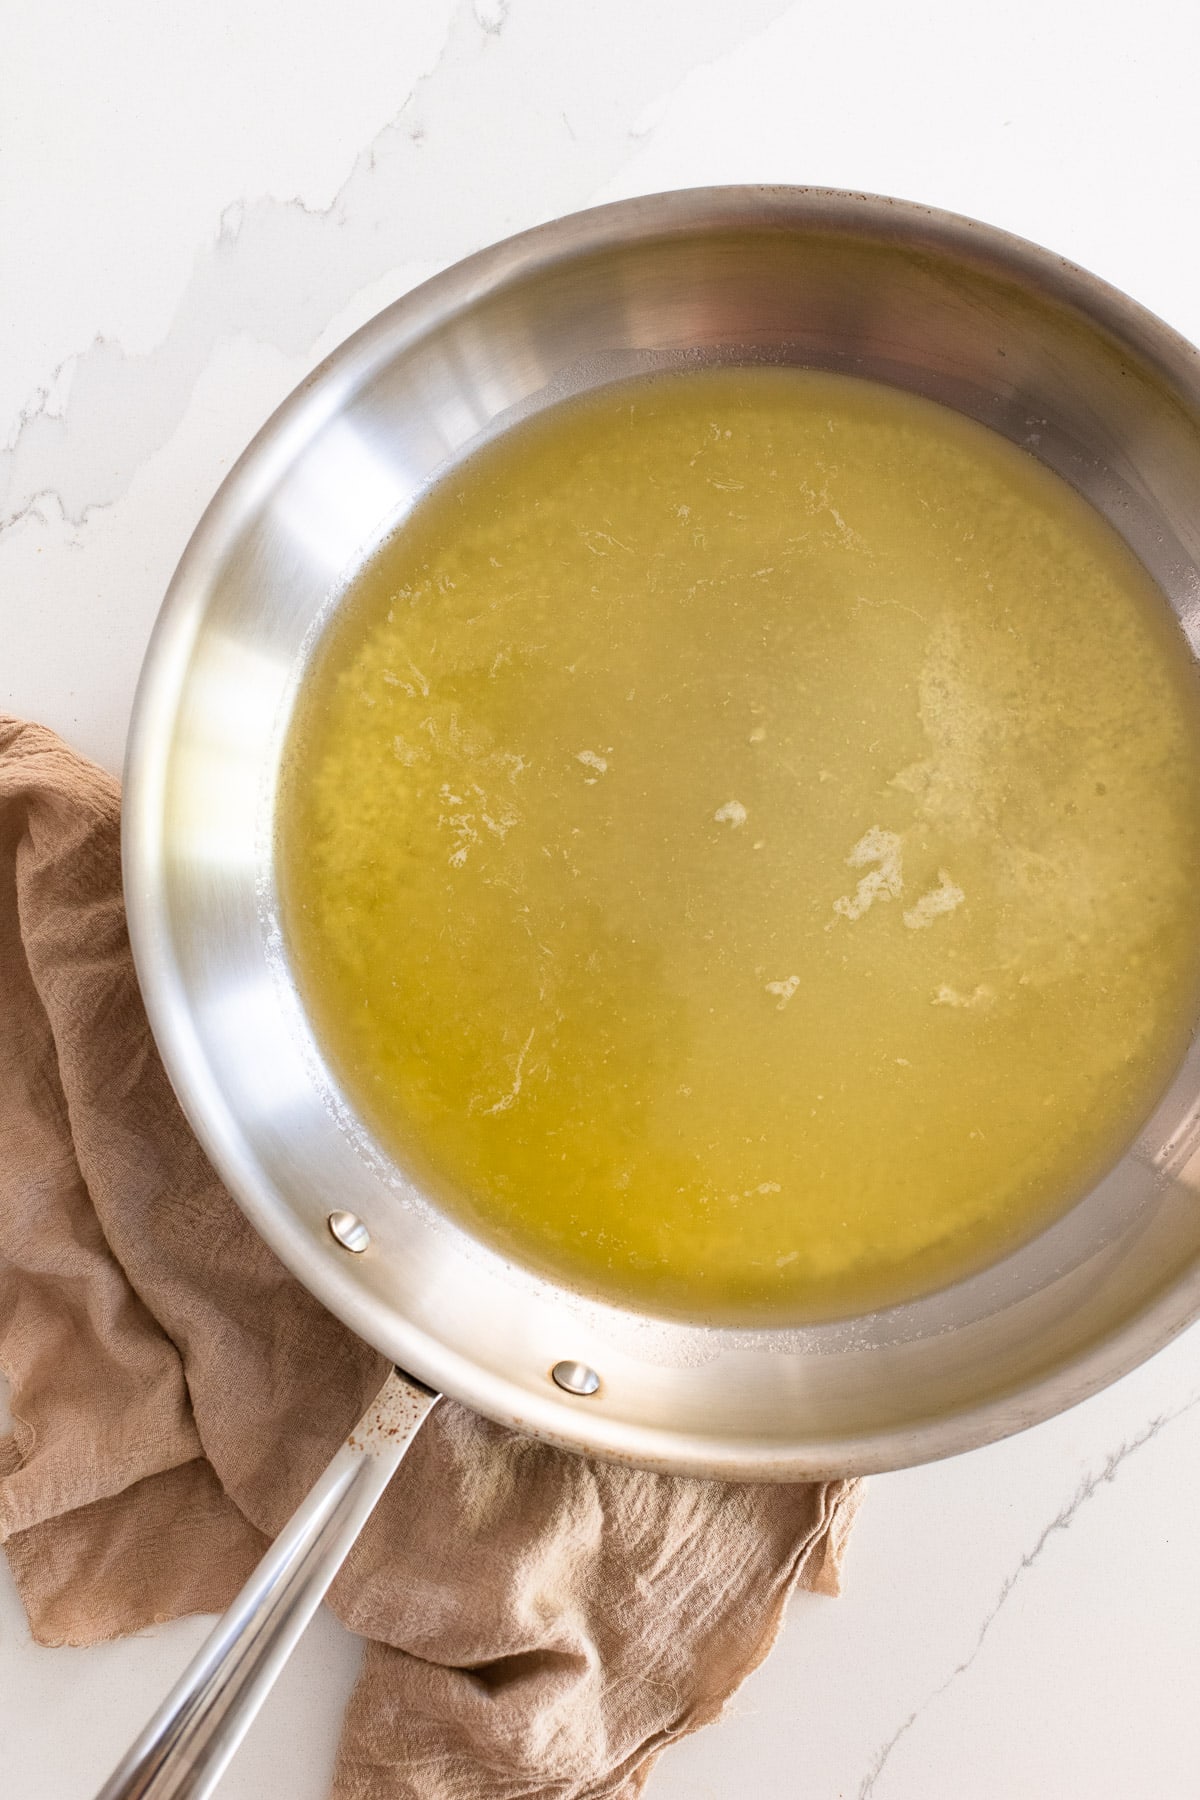 Melted butter in a stainless steel frying pan.